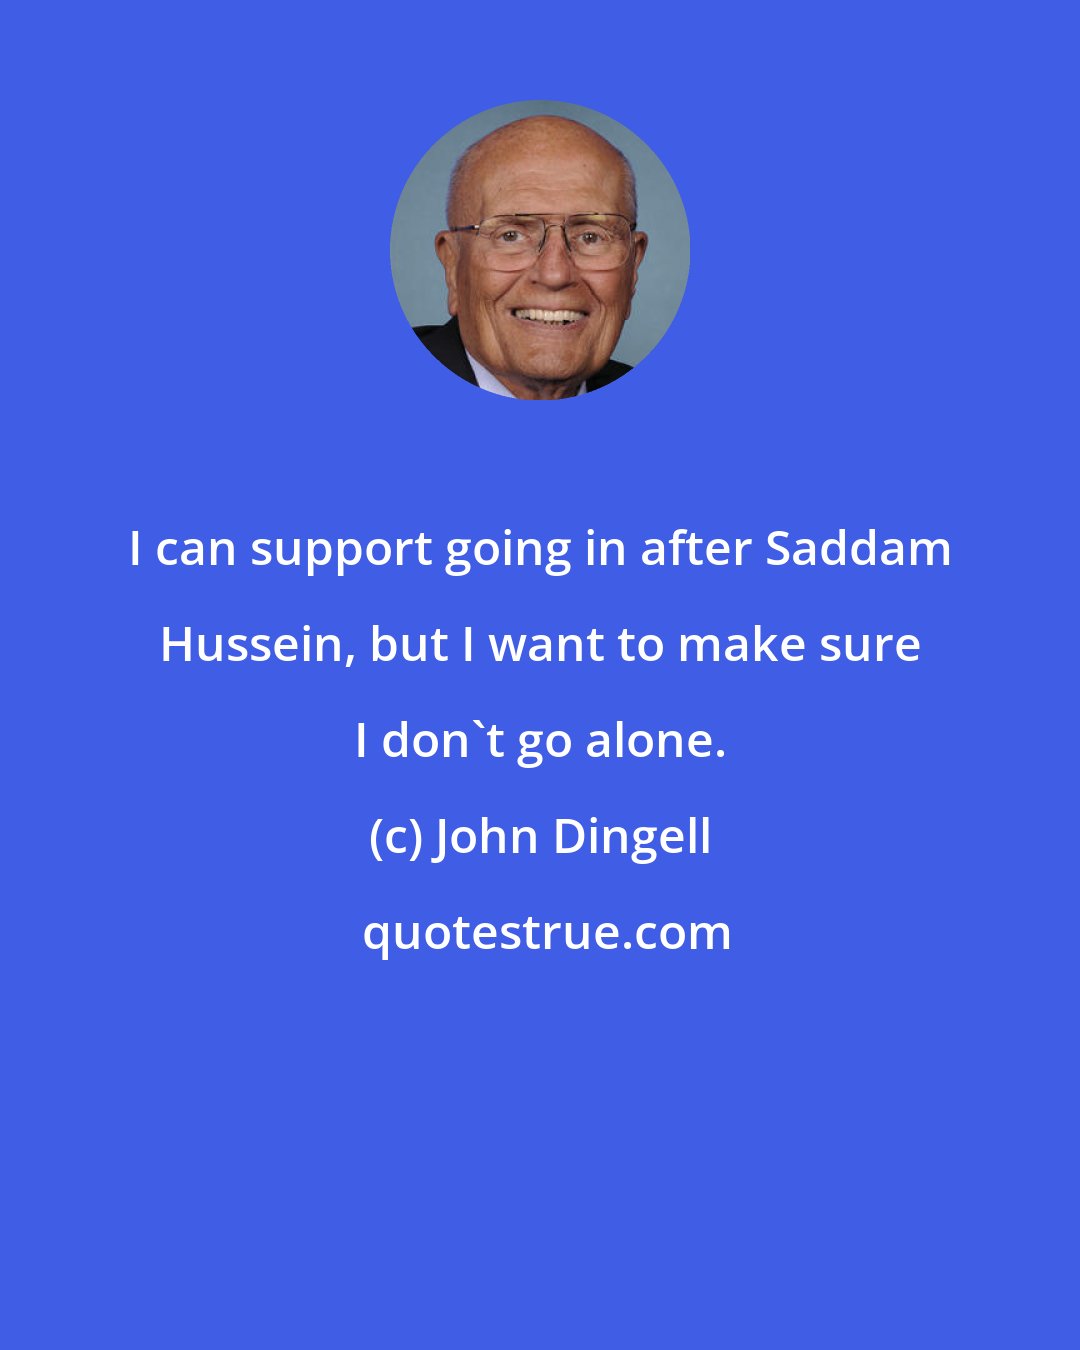 John Dingell: I can support going in after Saddam Hussein, but I want to make sure I don't go alone.